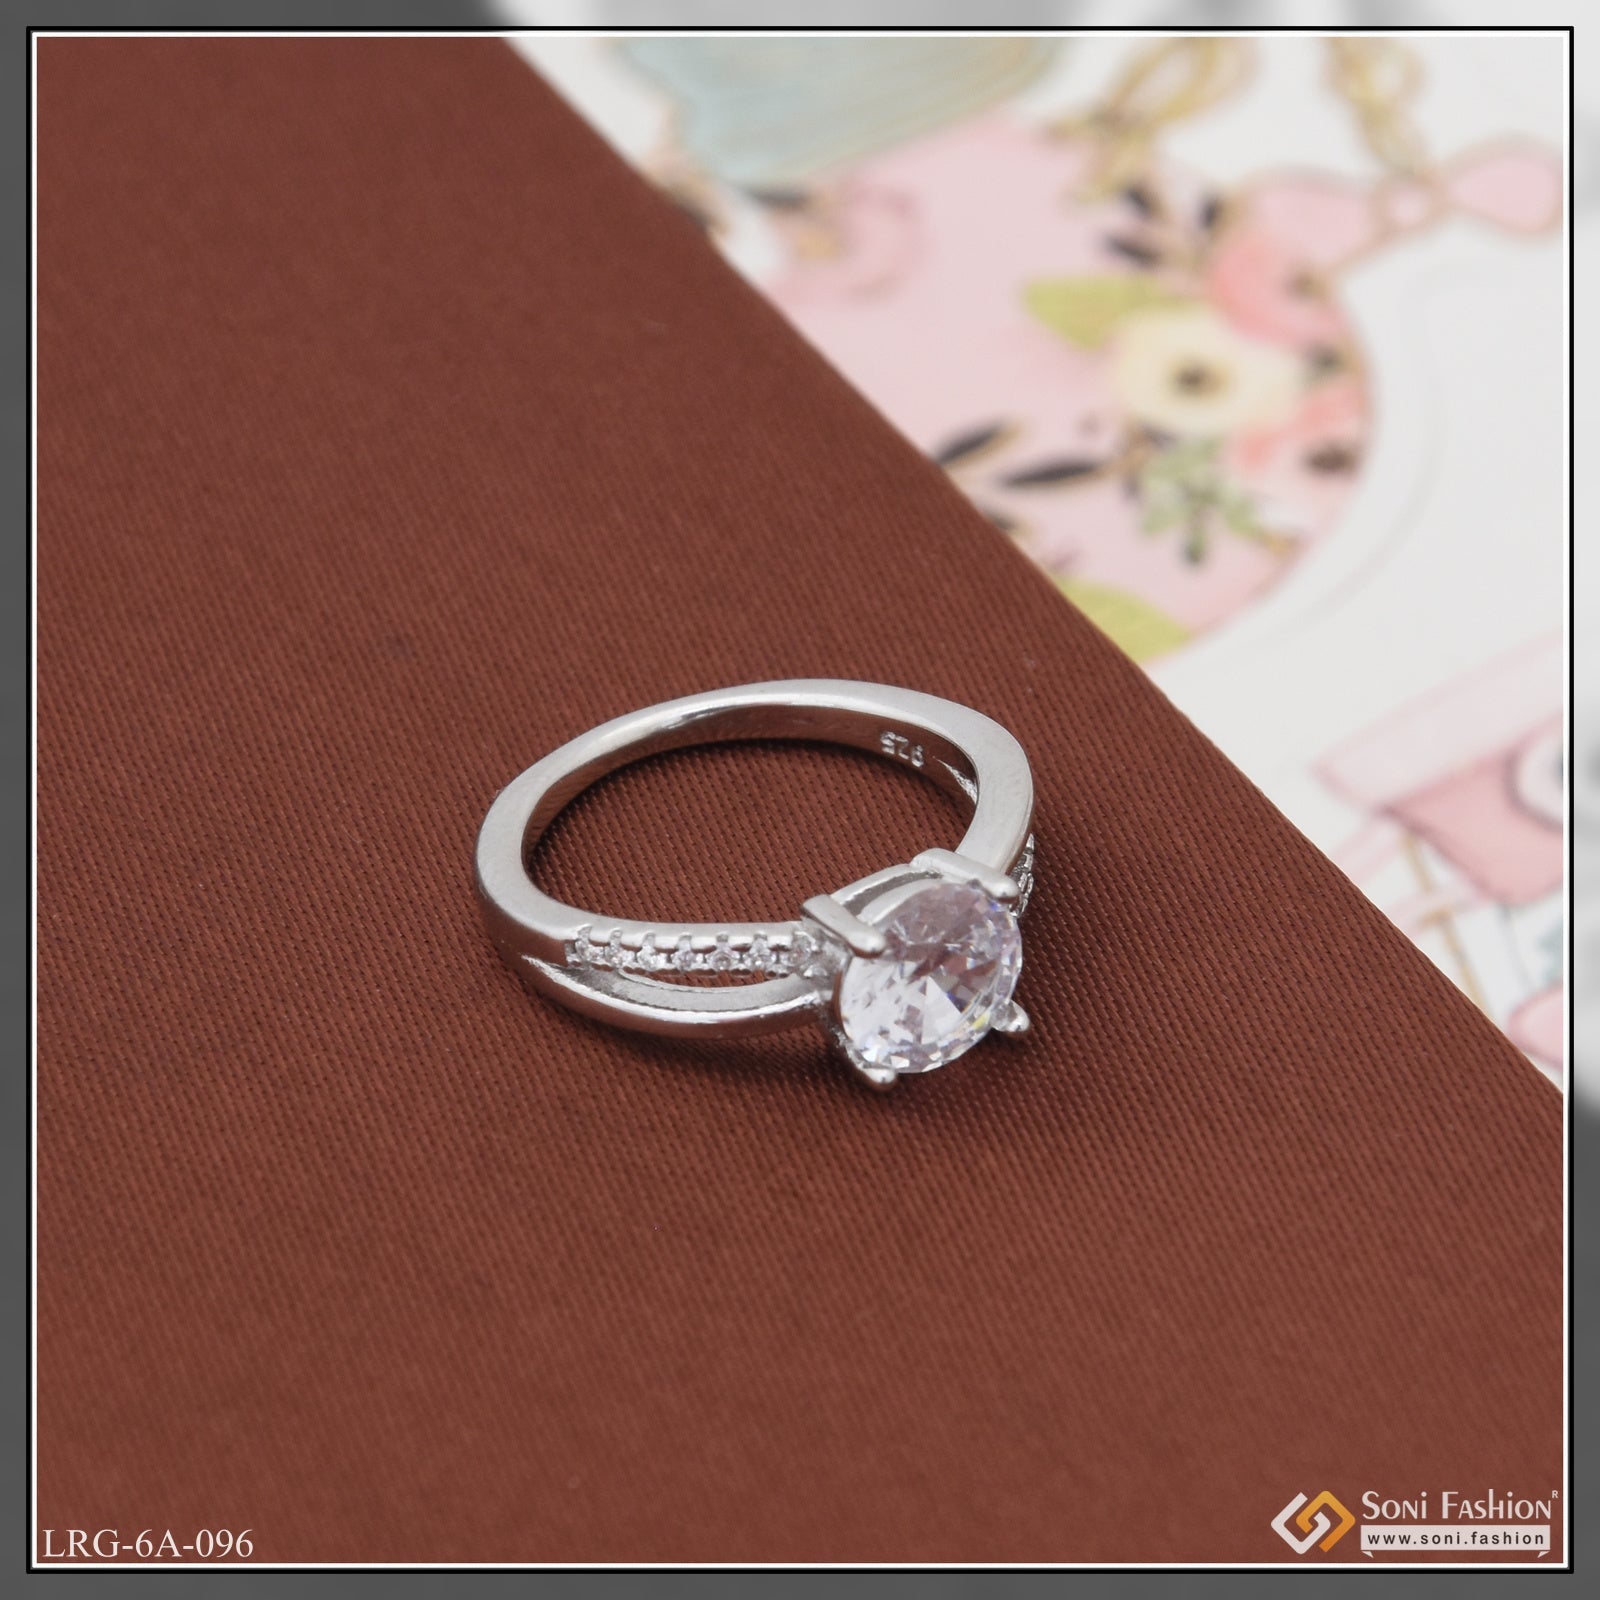 Design your own engagement ring Simple modern designer solitaire pavé